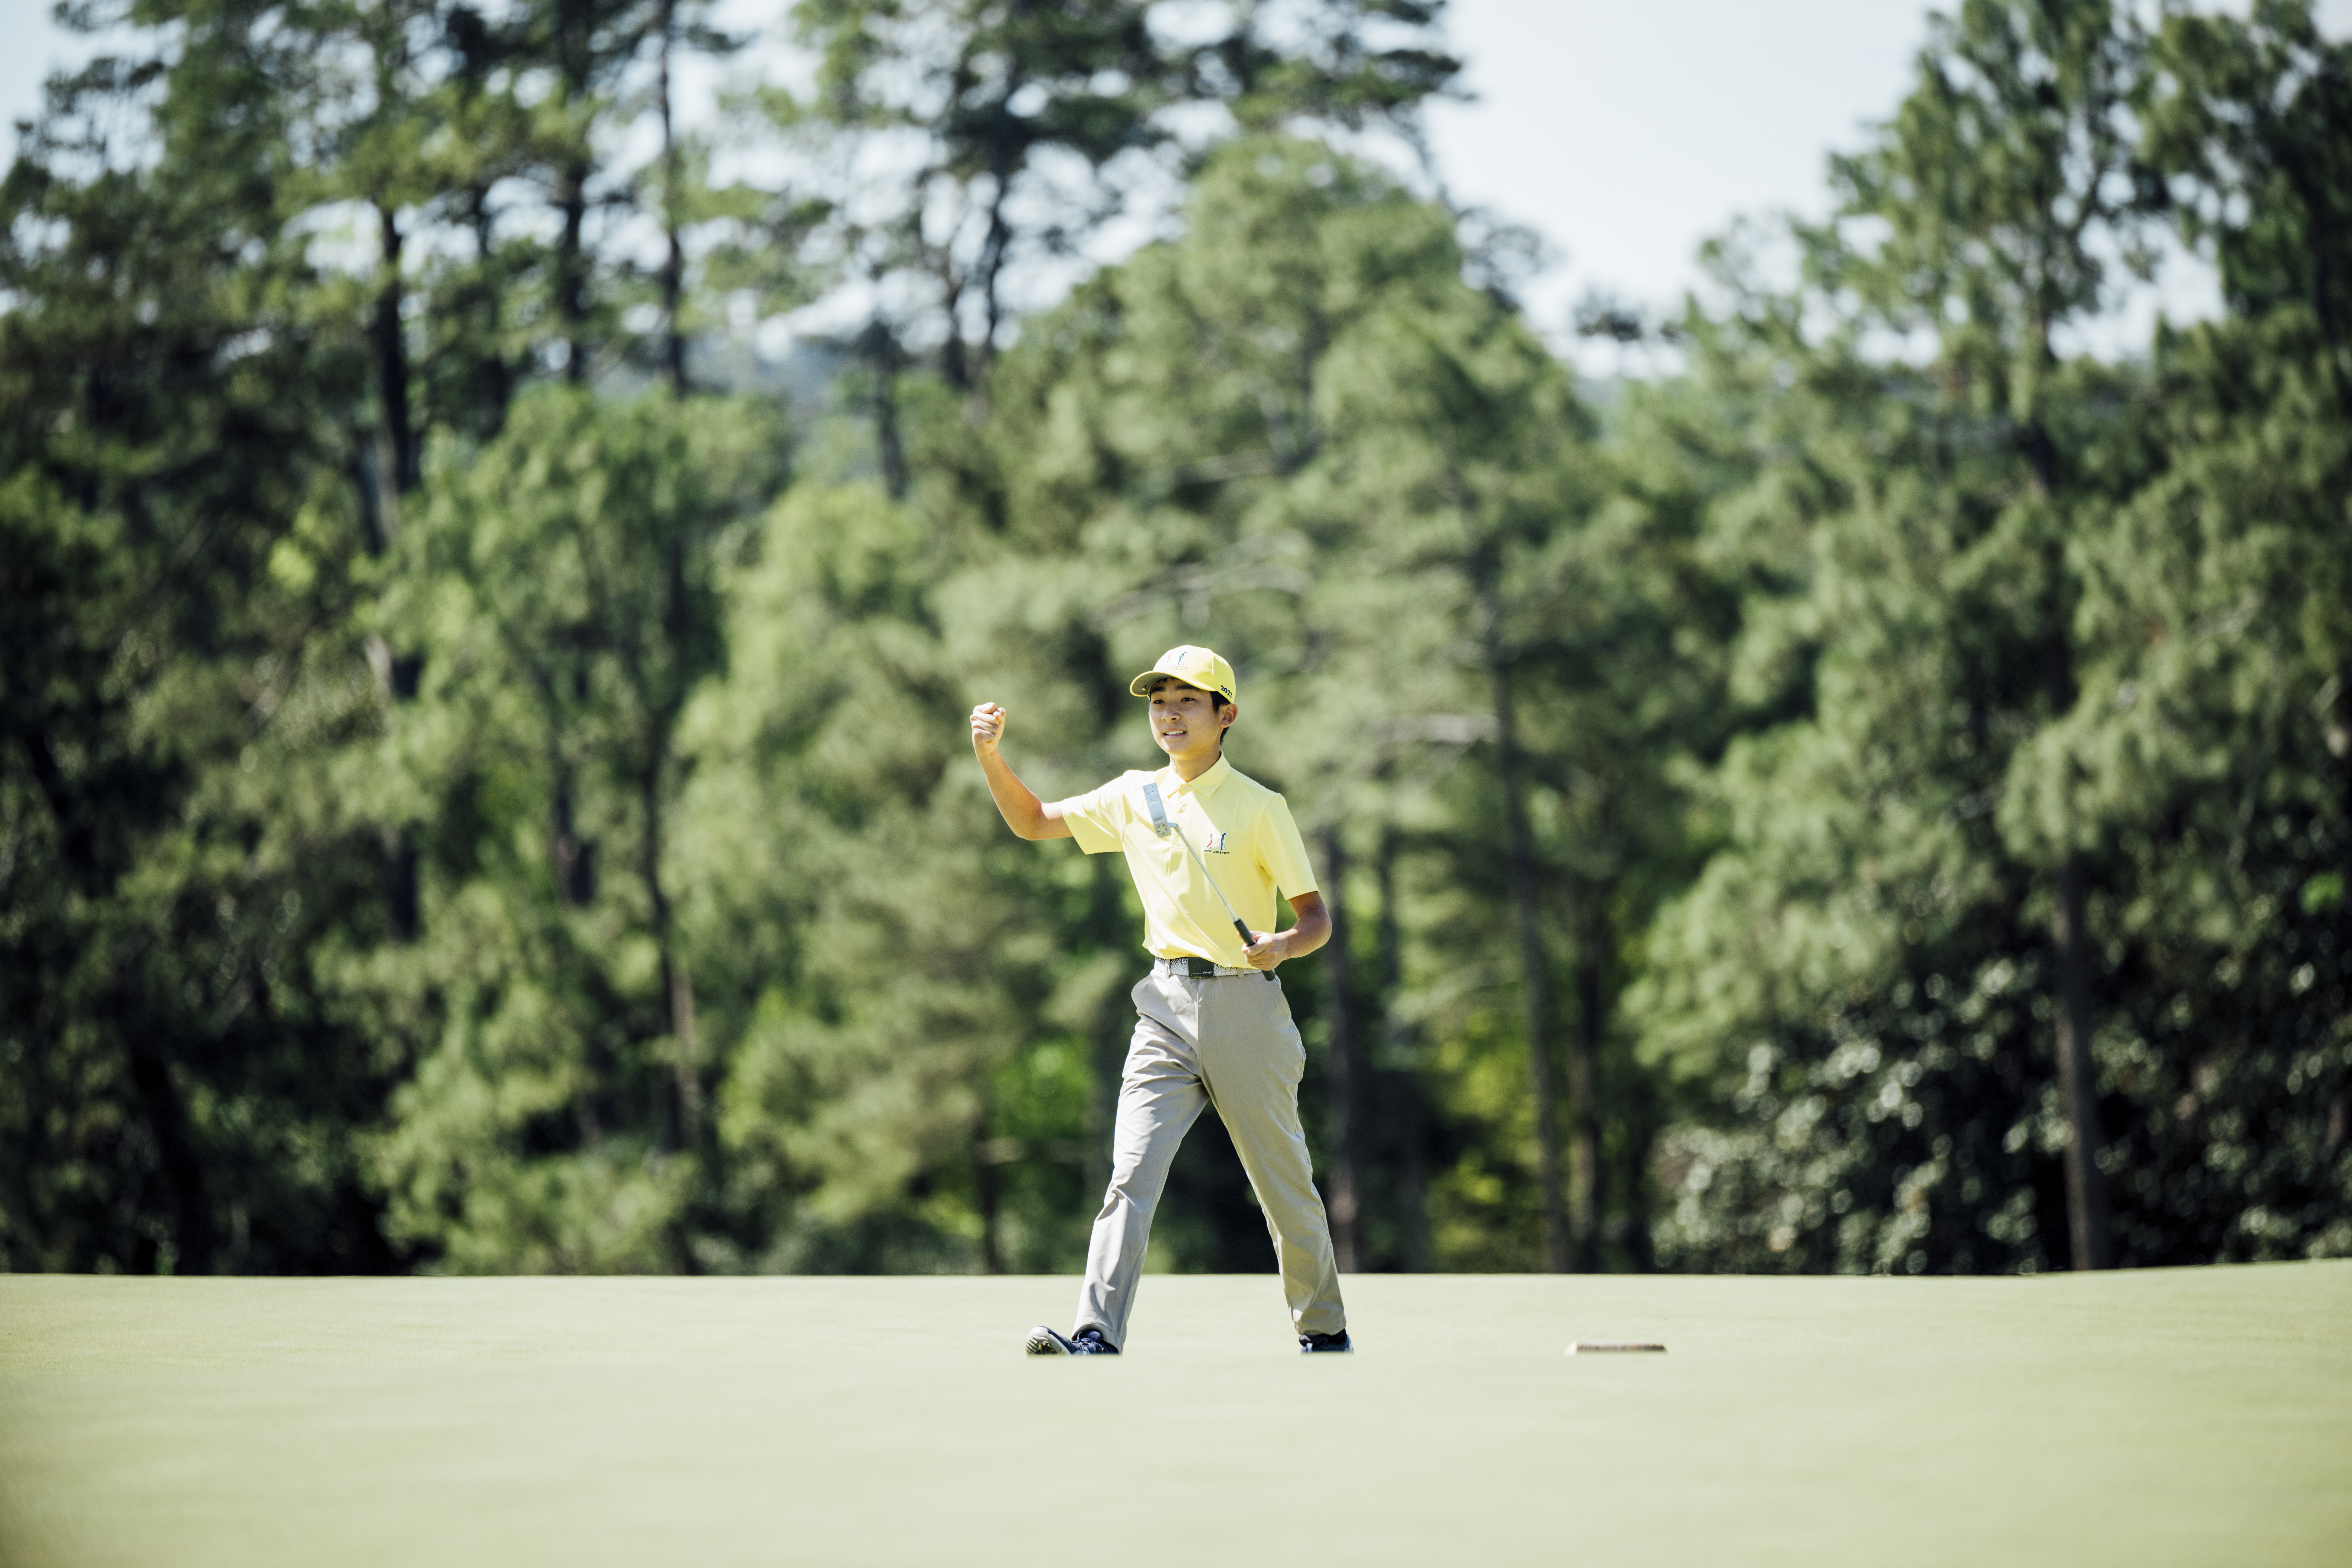 Leo Saito of the Boys 12-13 division pump during the Drive, Chip & Putt National Finals at Augusta National Golf Club on Sunday, April 2, 2023. (Logan Whitton/Augusta National Golf Club)